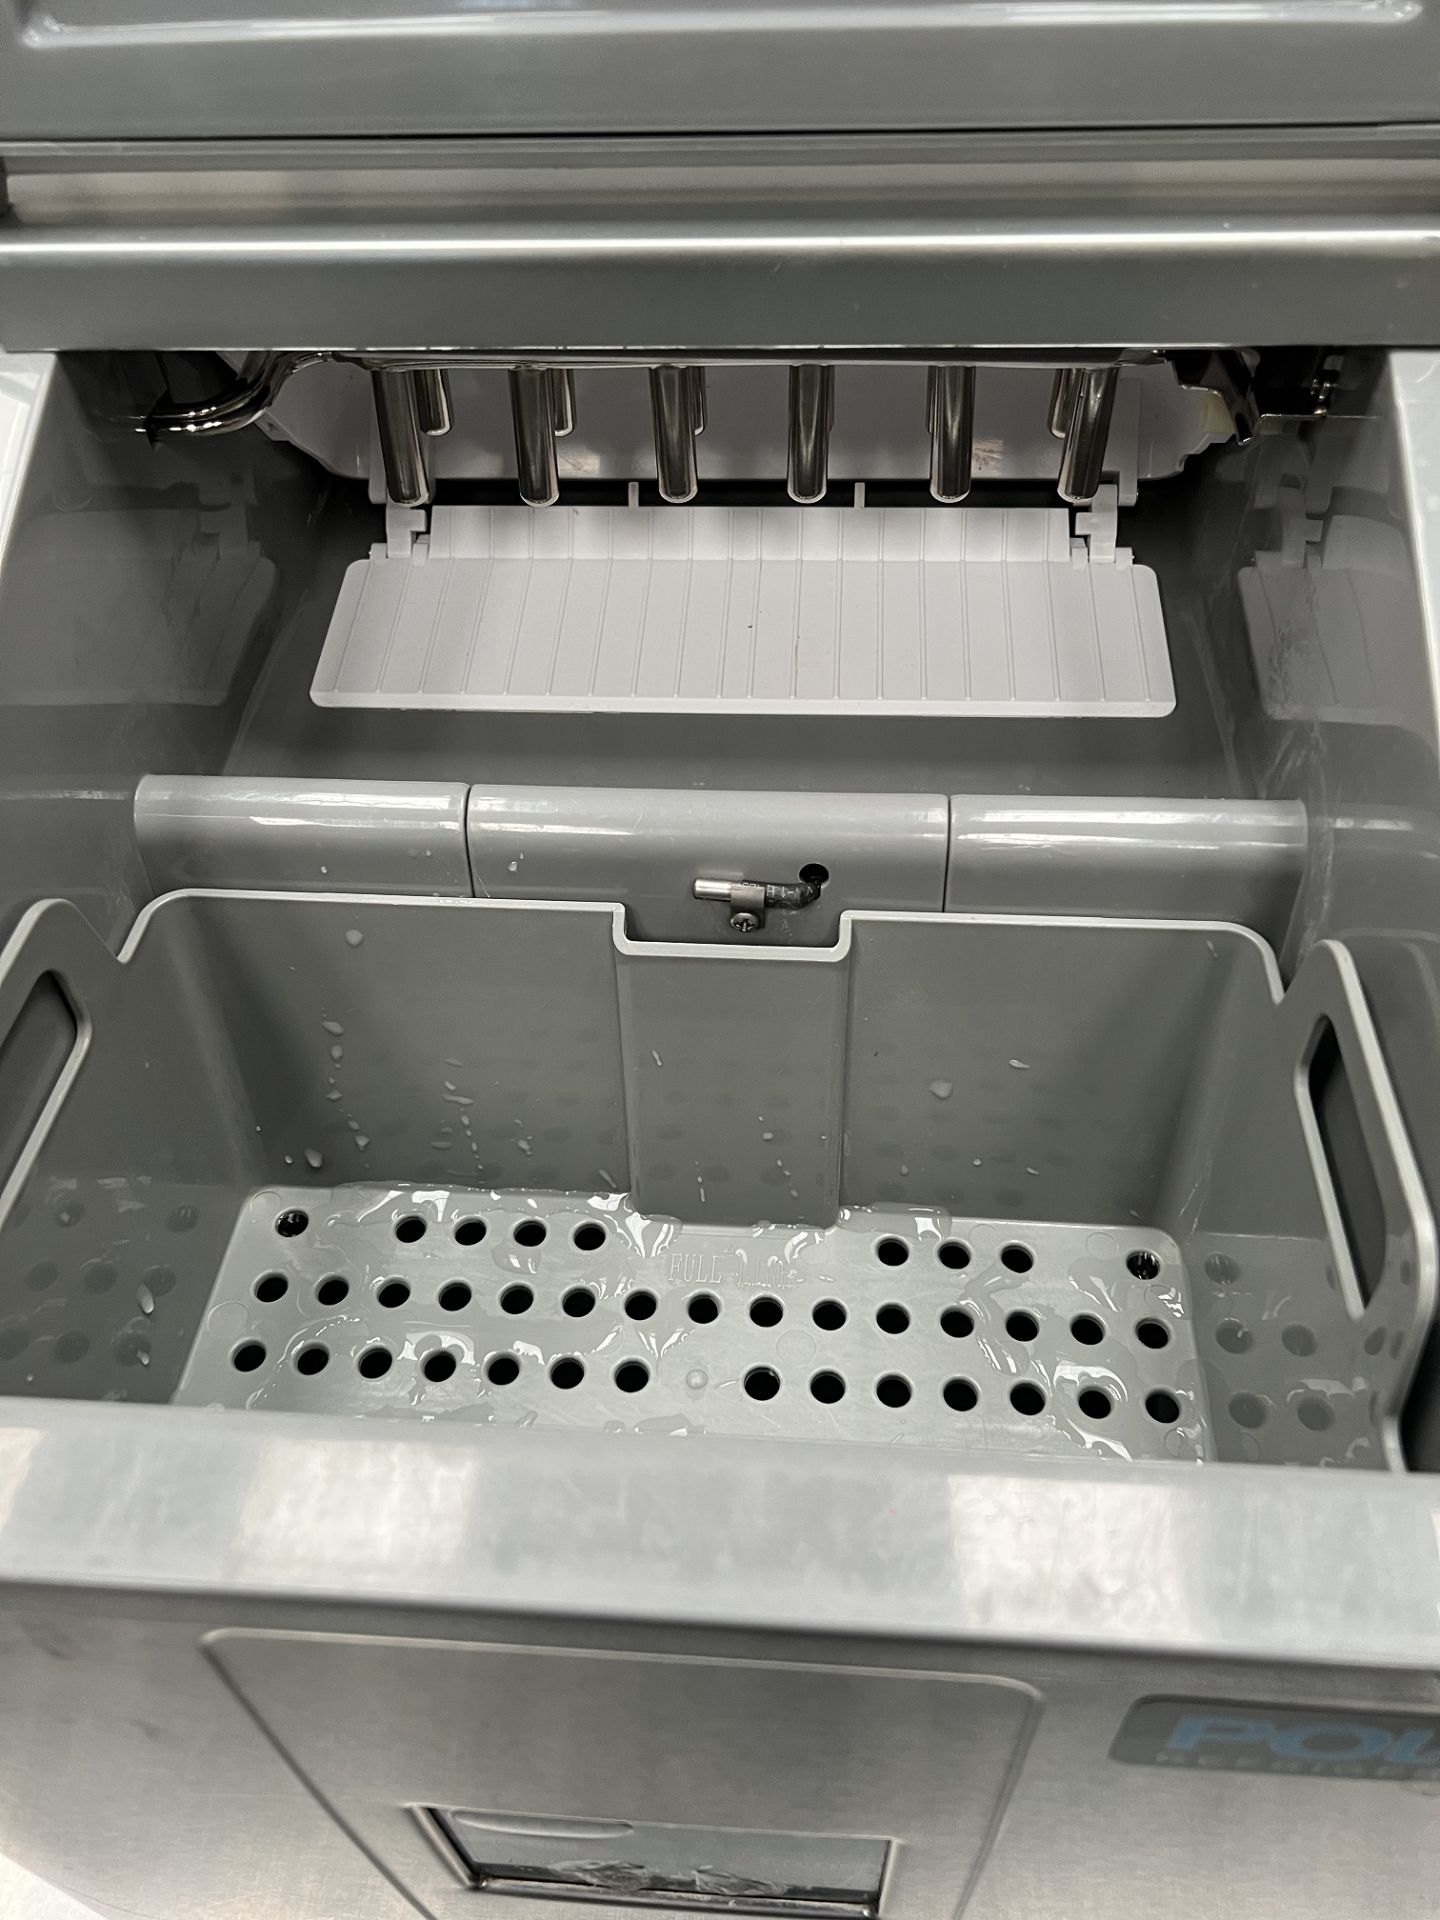 Polar Table Top Ice Maker - Image 2 of 2